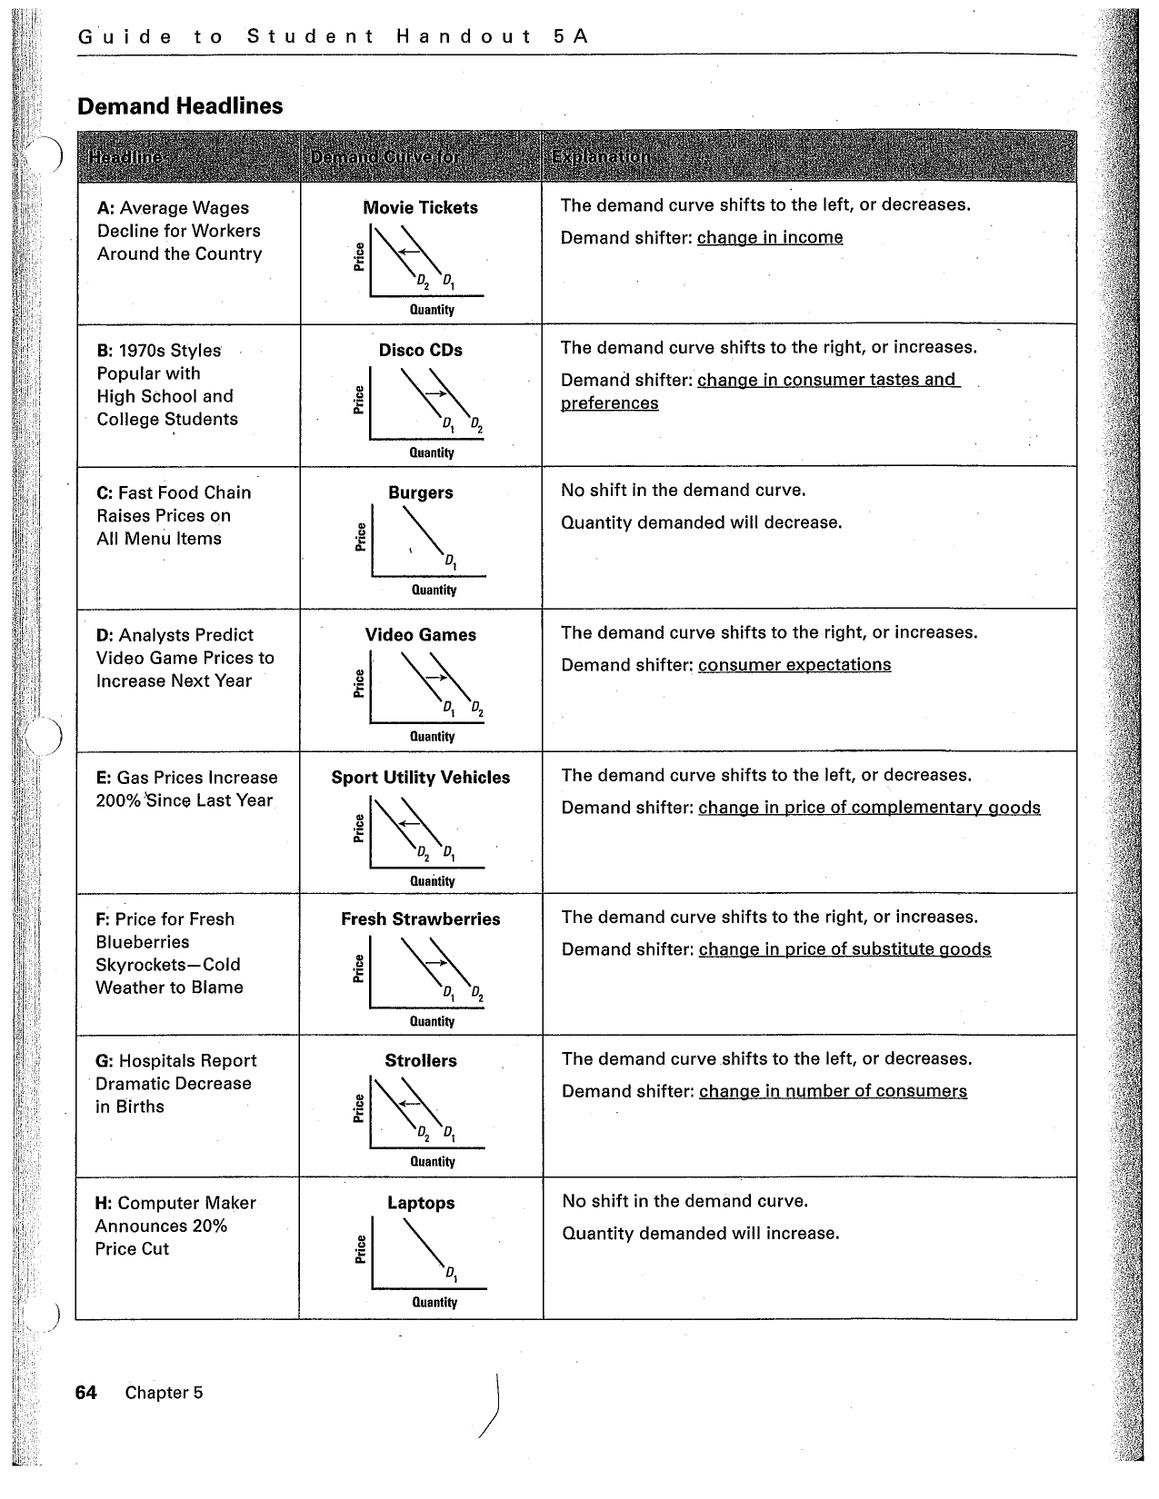 Supply And Demand Worksheet Answer Key — db-excel.com